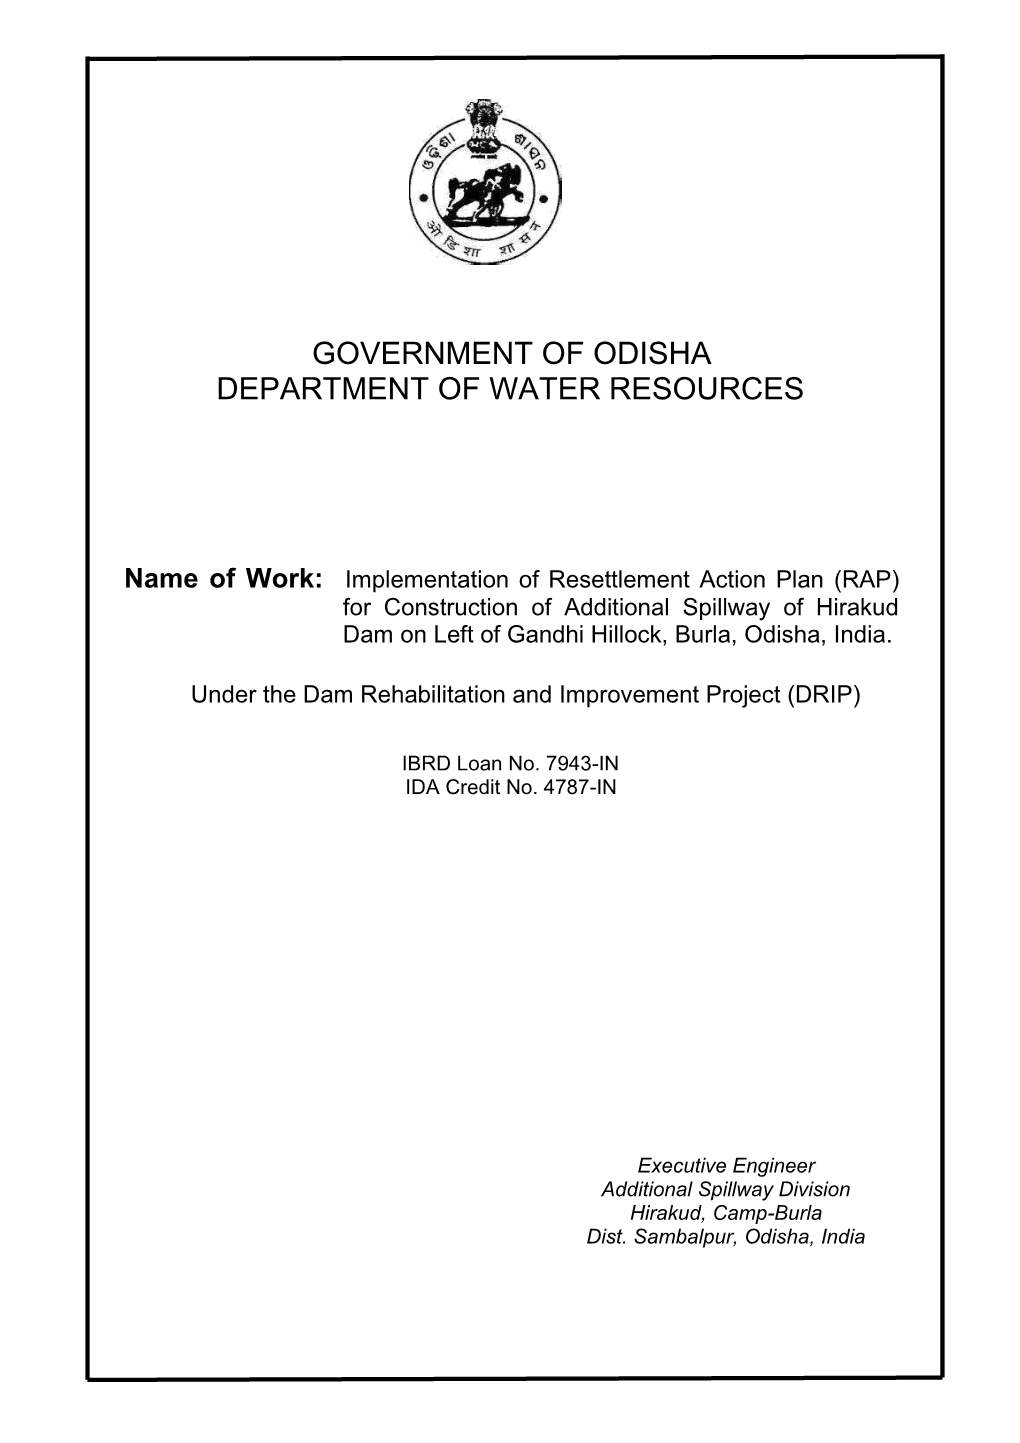 Government of Odisha Department of Water Resources